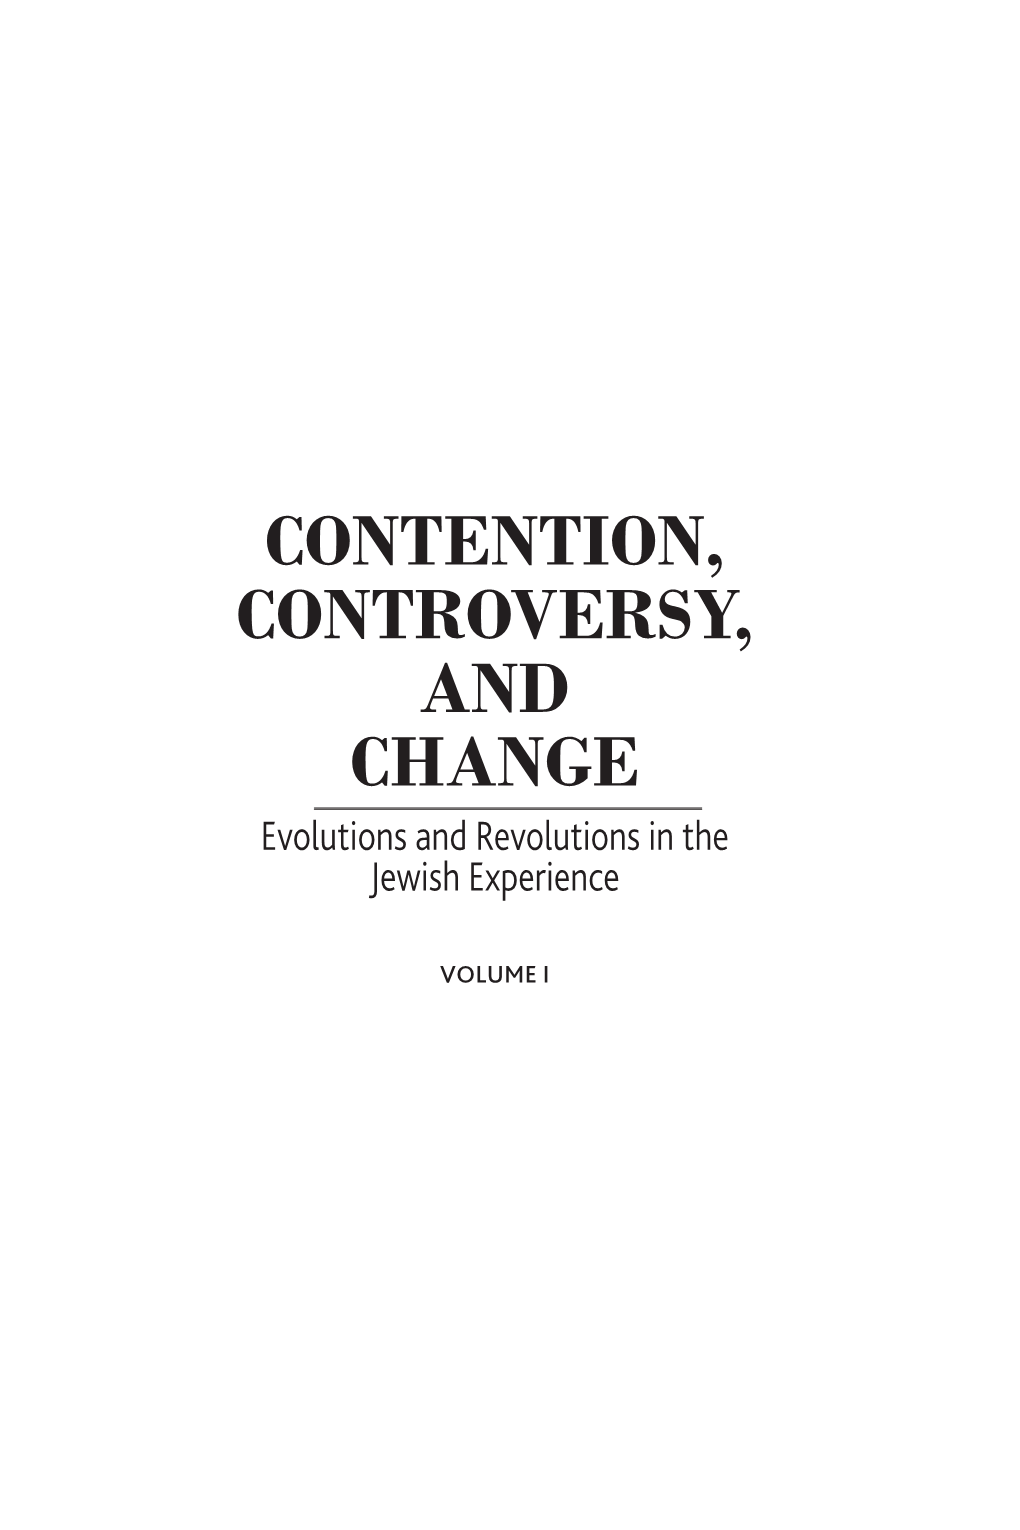 CONTENTION, CONTROVERSY, and CHANGE Evolutions and Revolutions in the Jewish Experience